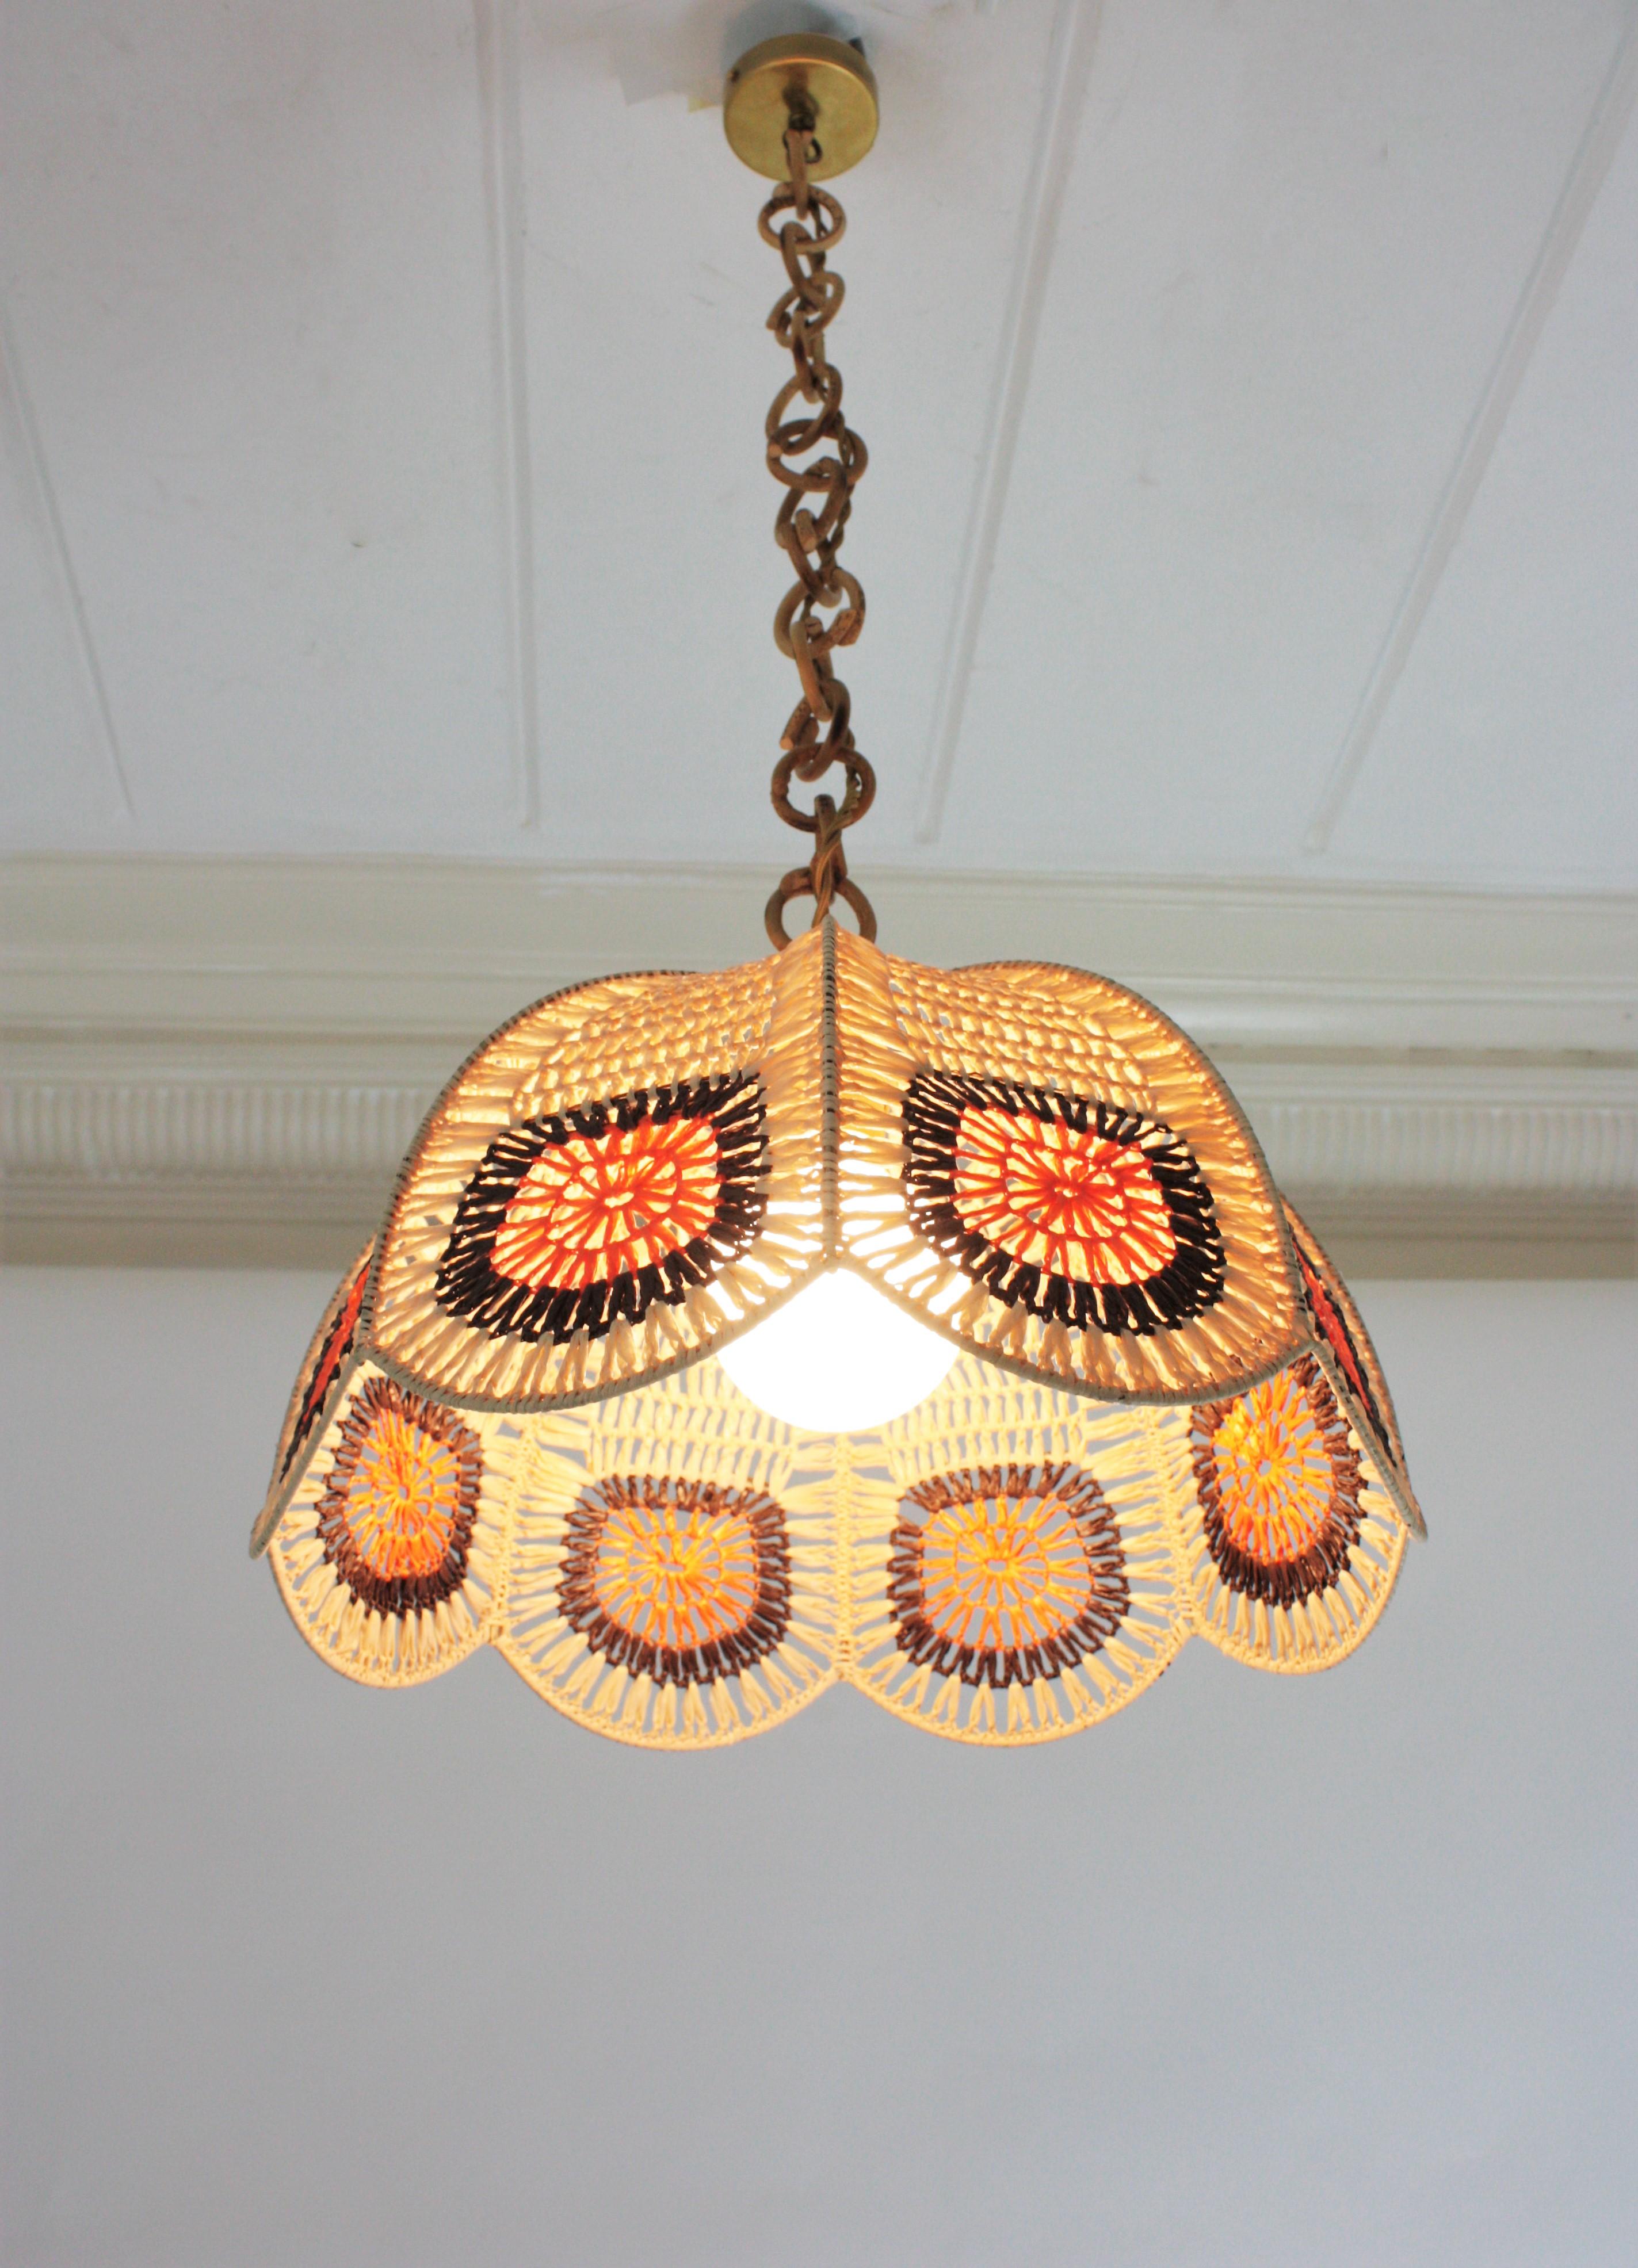 Spanish Modernist Pendant Lamp in Beige, Orange and Brown Macrame For Sale 3